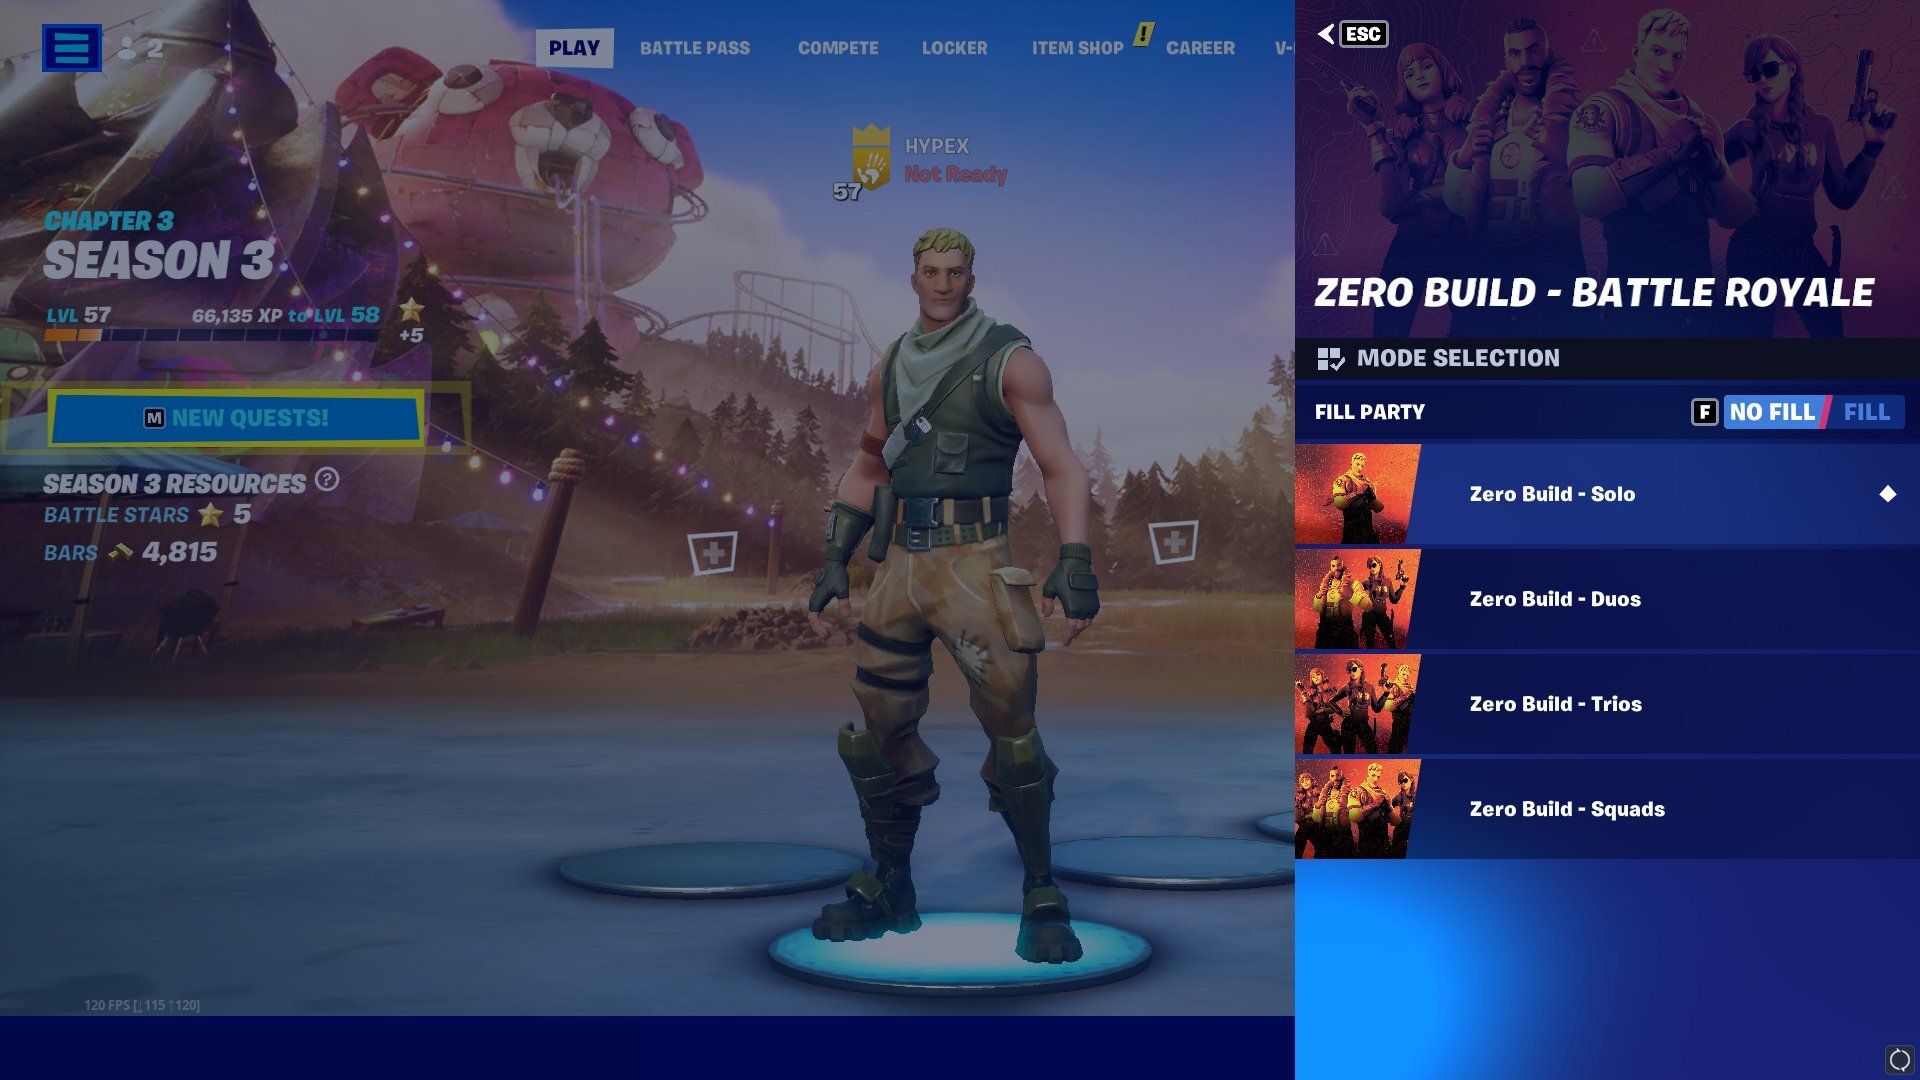 Load into the Lobby in Fortnite - Game Mode Select Screen Removed